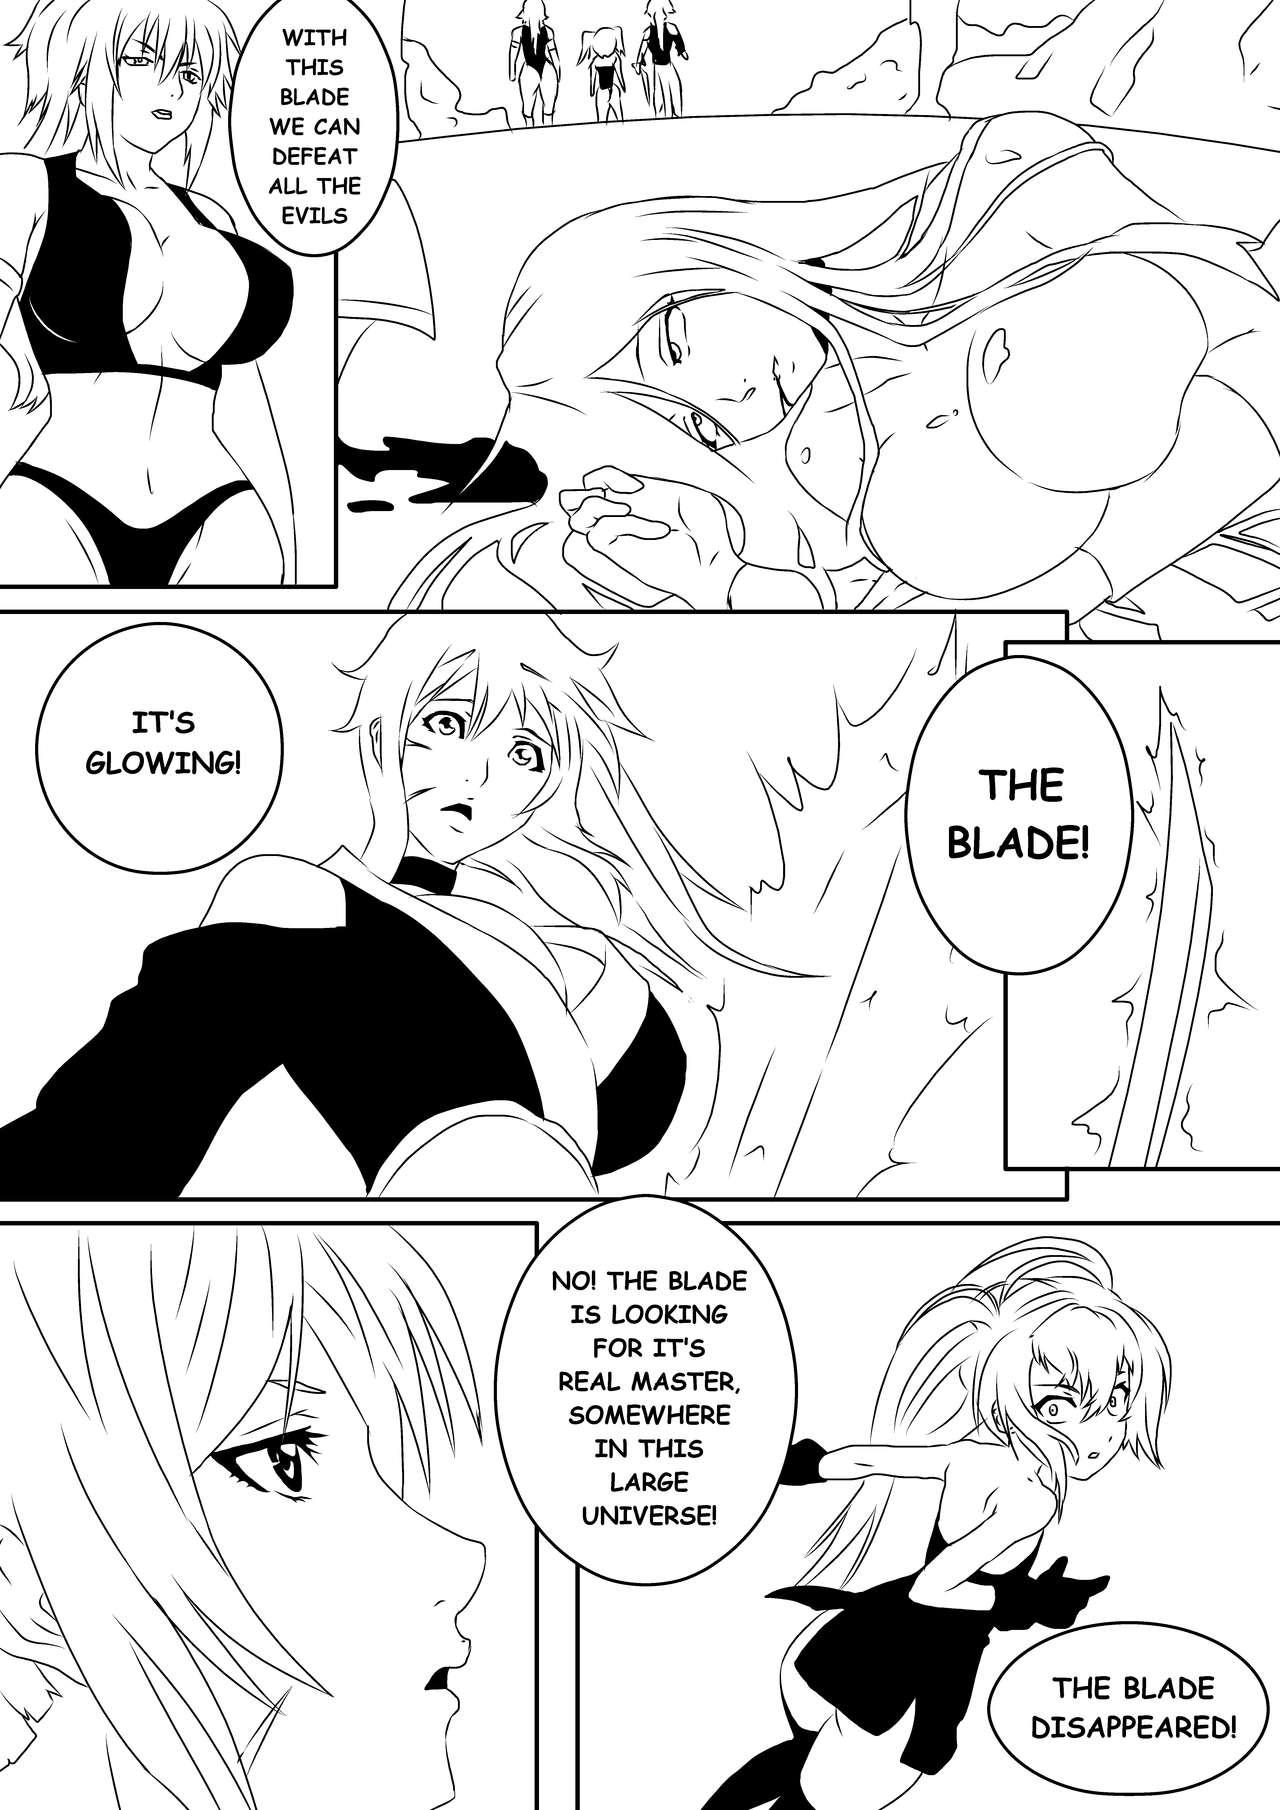 The King Blade 7